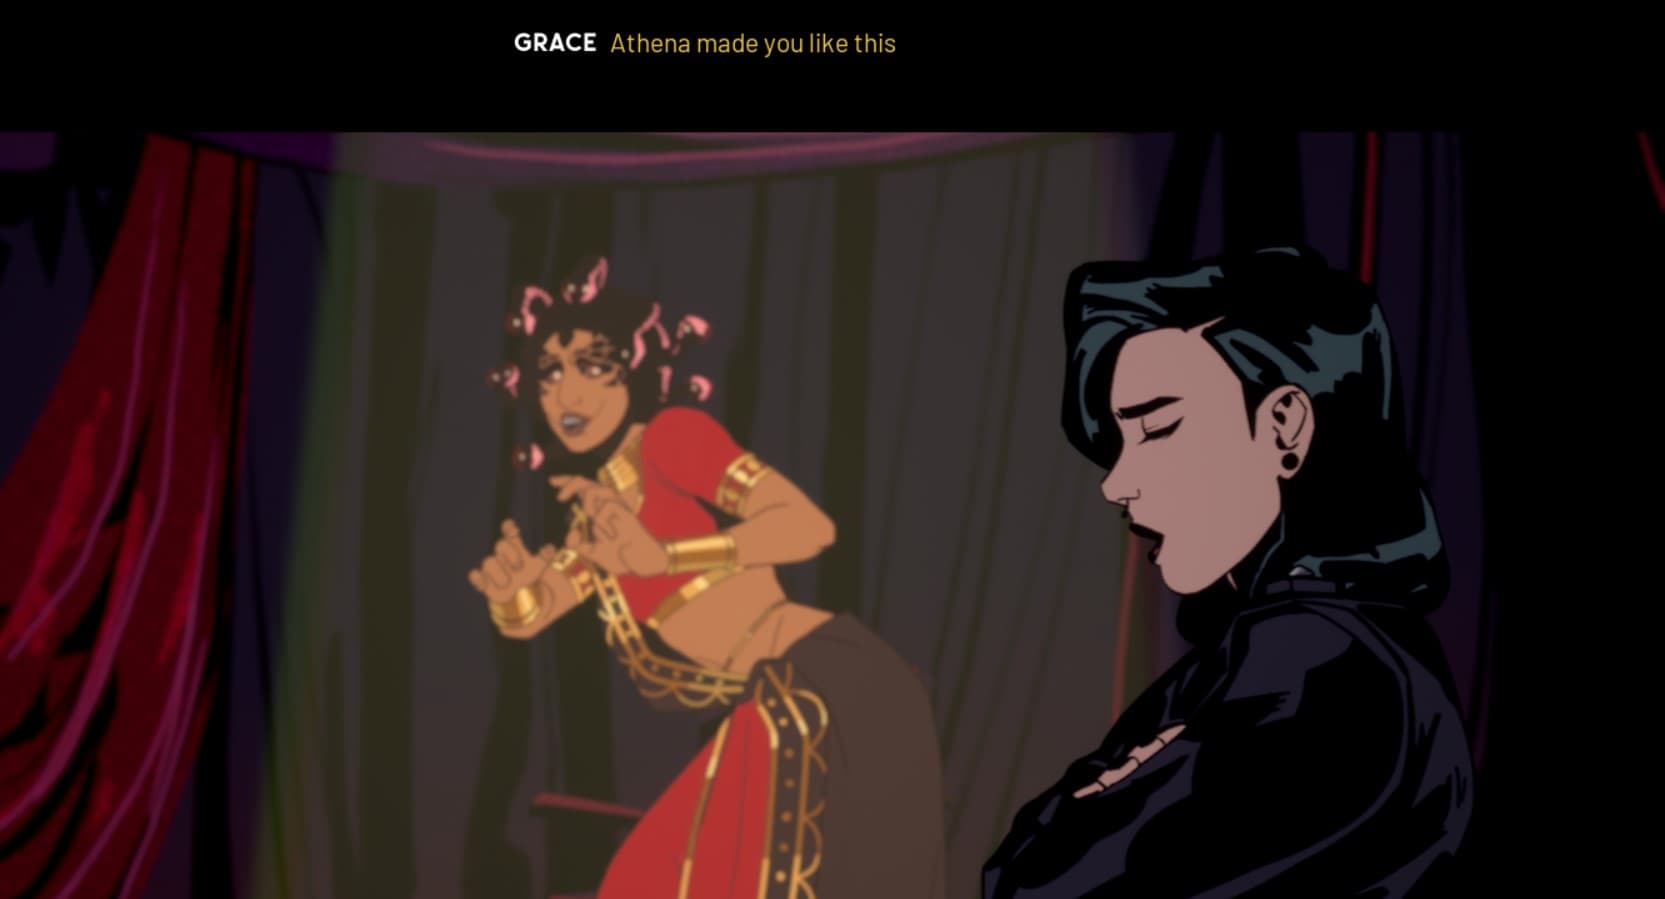 Stray Gods screenshot of Grace telling Medusa that Athena made her like this while Medusa cringes in a spotlight in the background